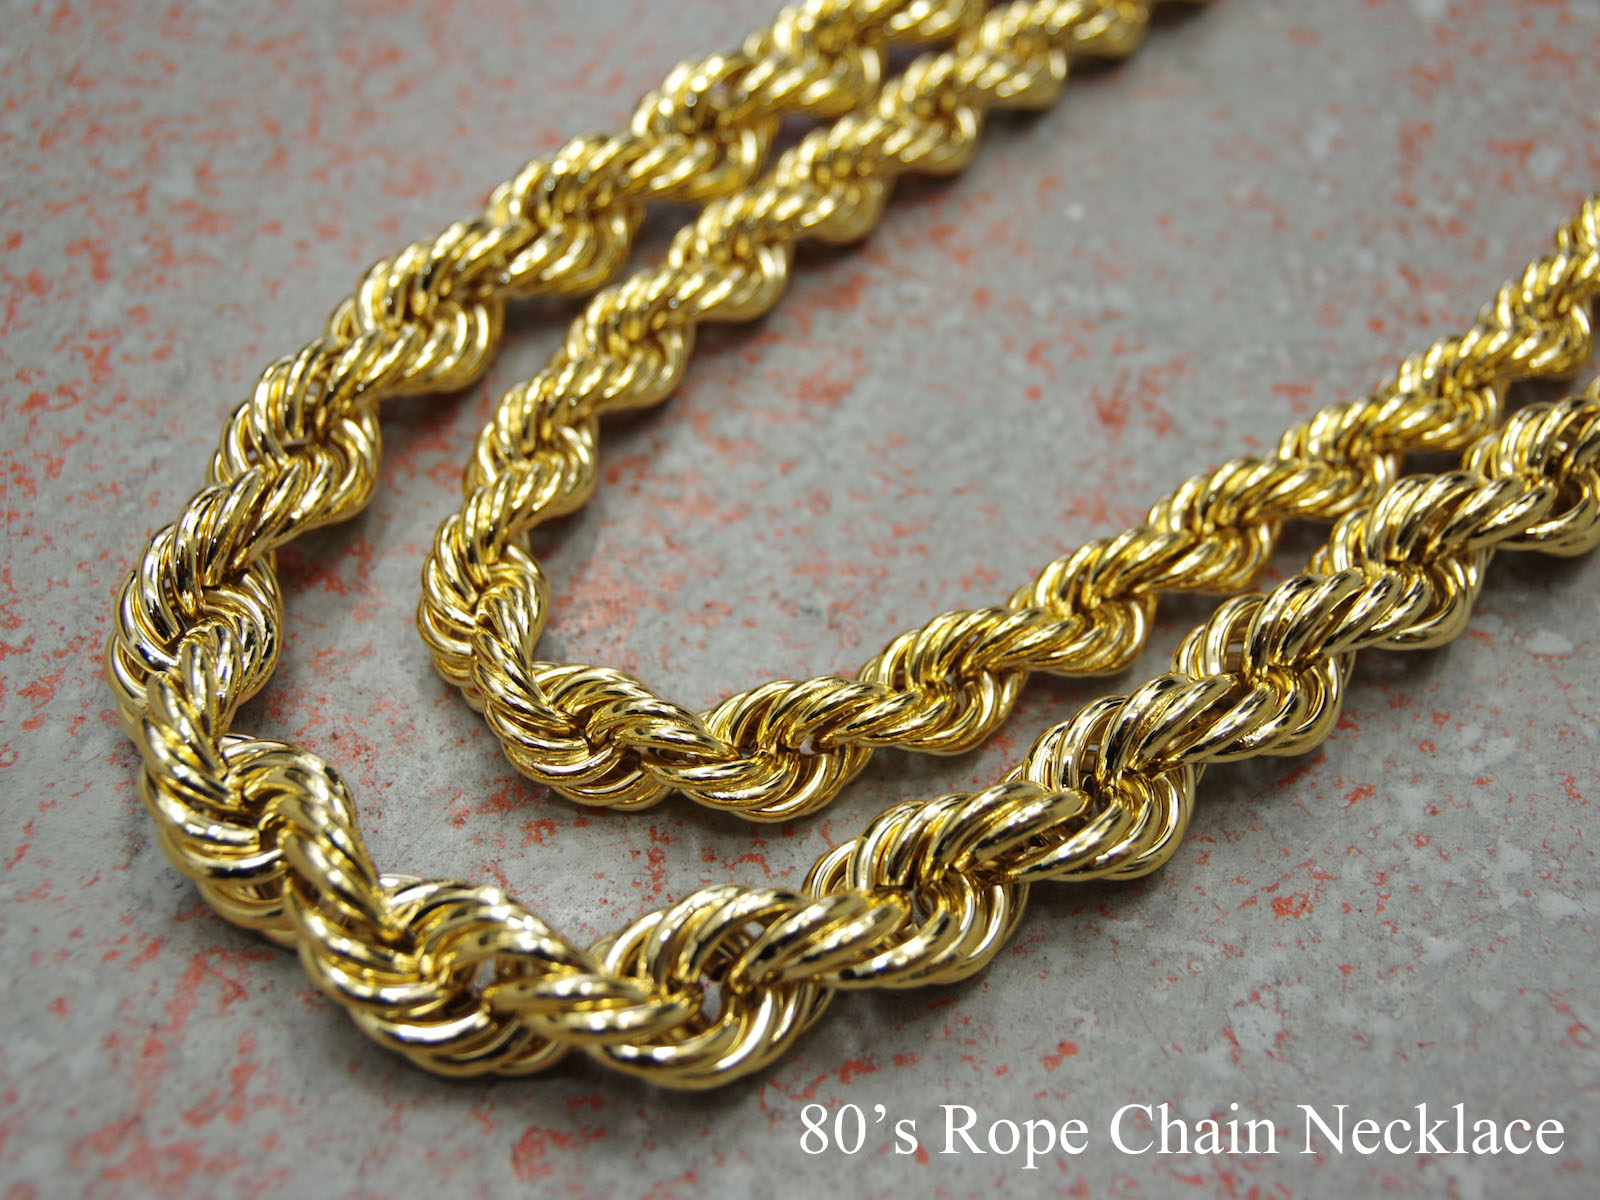 80’s Rope Chain Necklace / ロープ・チェーン・ネックレス